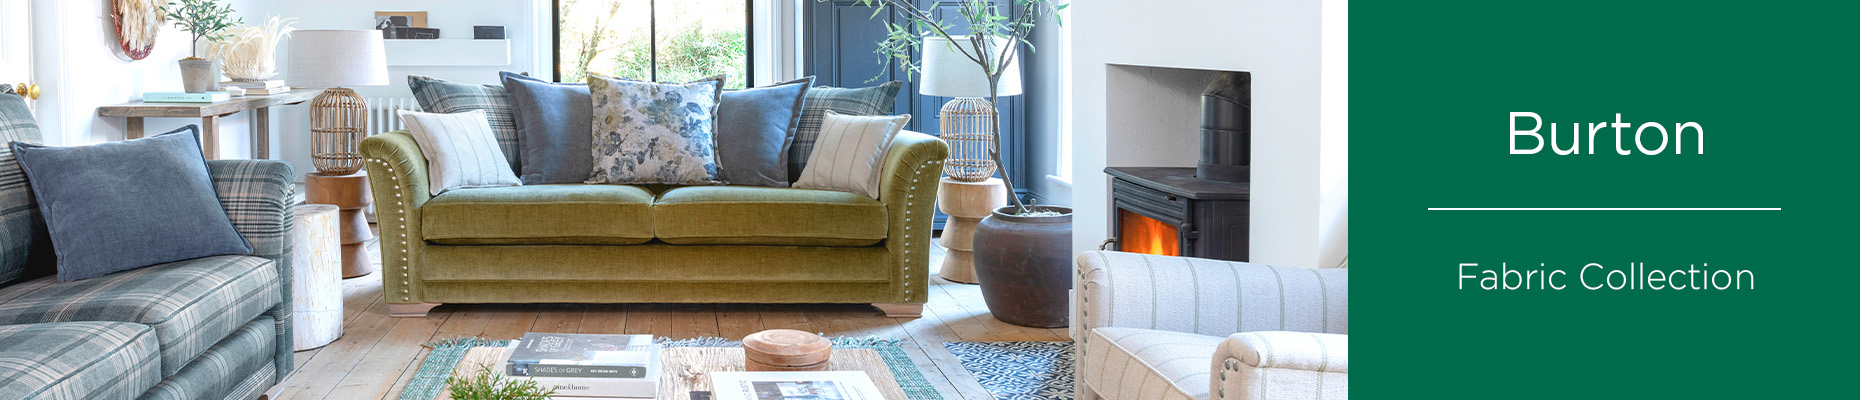 Burton Sofa Collection by Alstons Upholstery at Forrest Furnishing